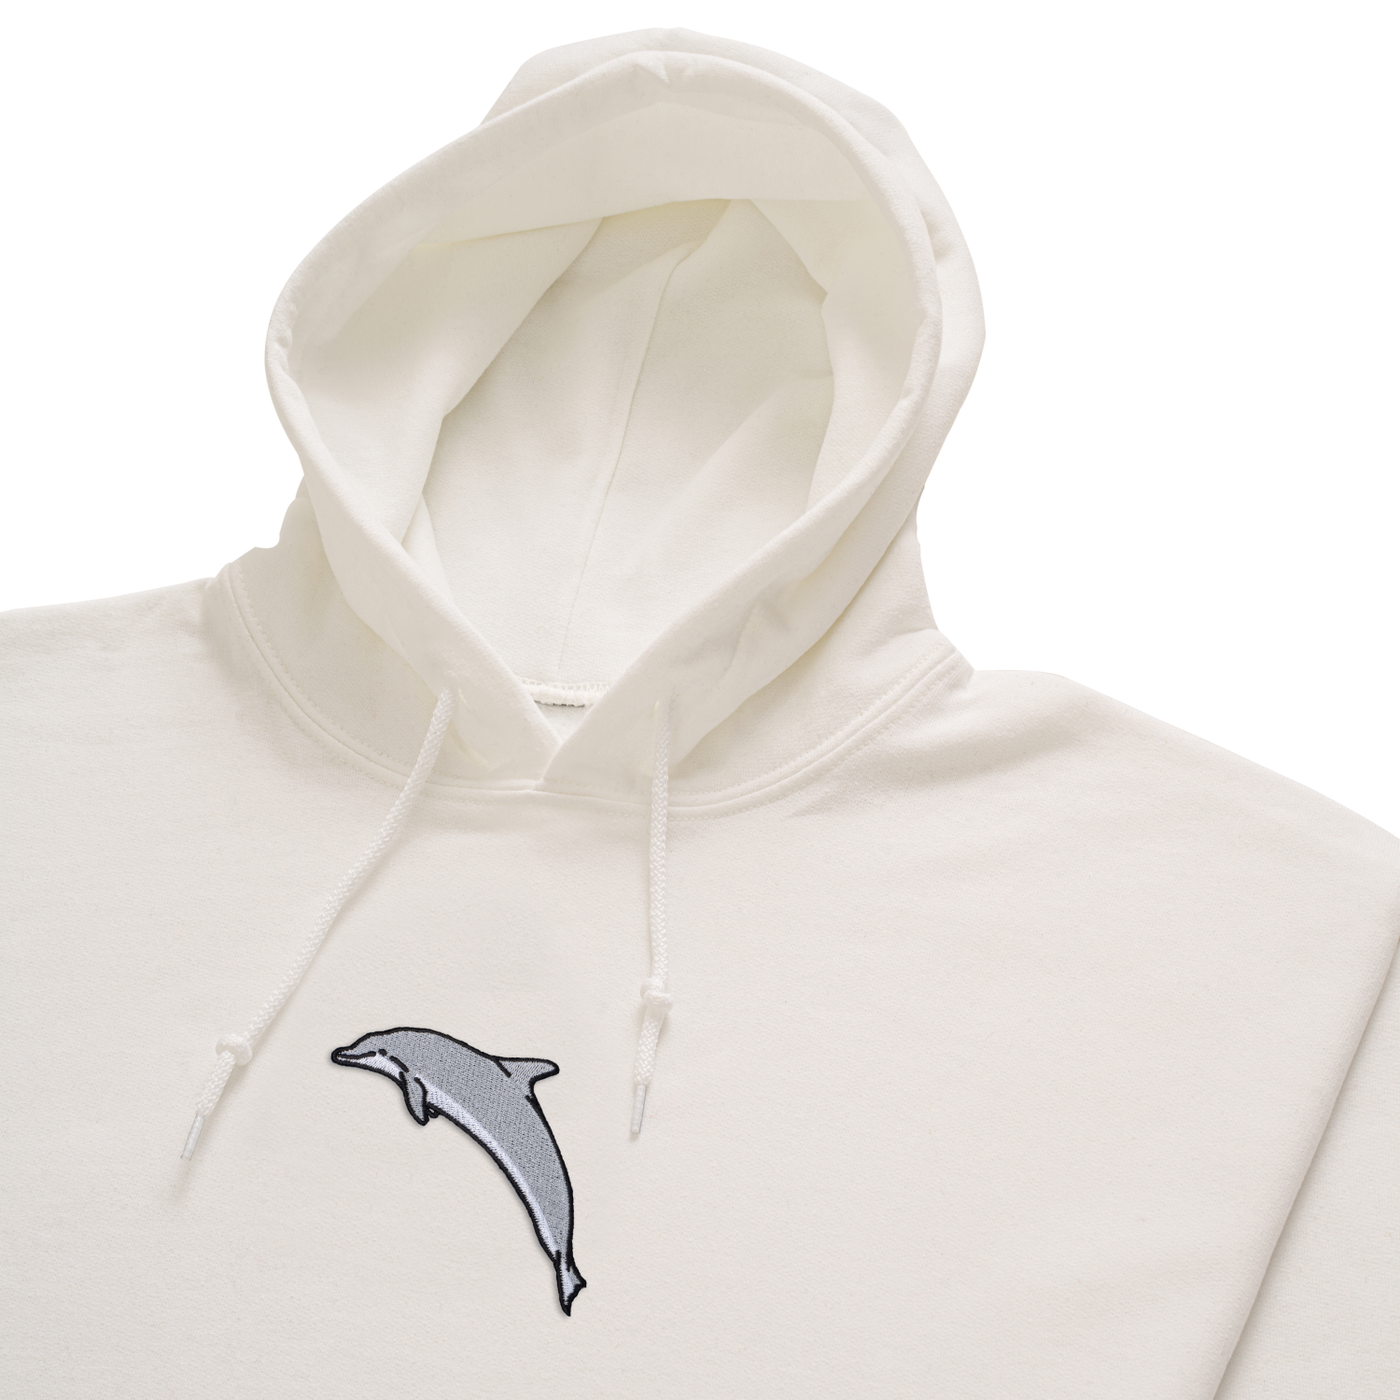 Bobby's Planet Women's Embroidered Dolphin Hoodie from Seven Seas Fish Animals Collection in White Color#color_white